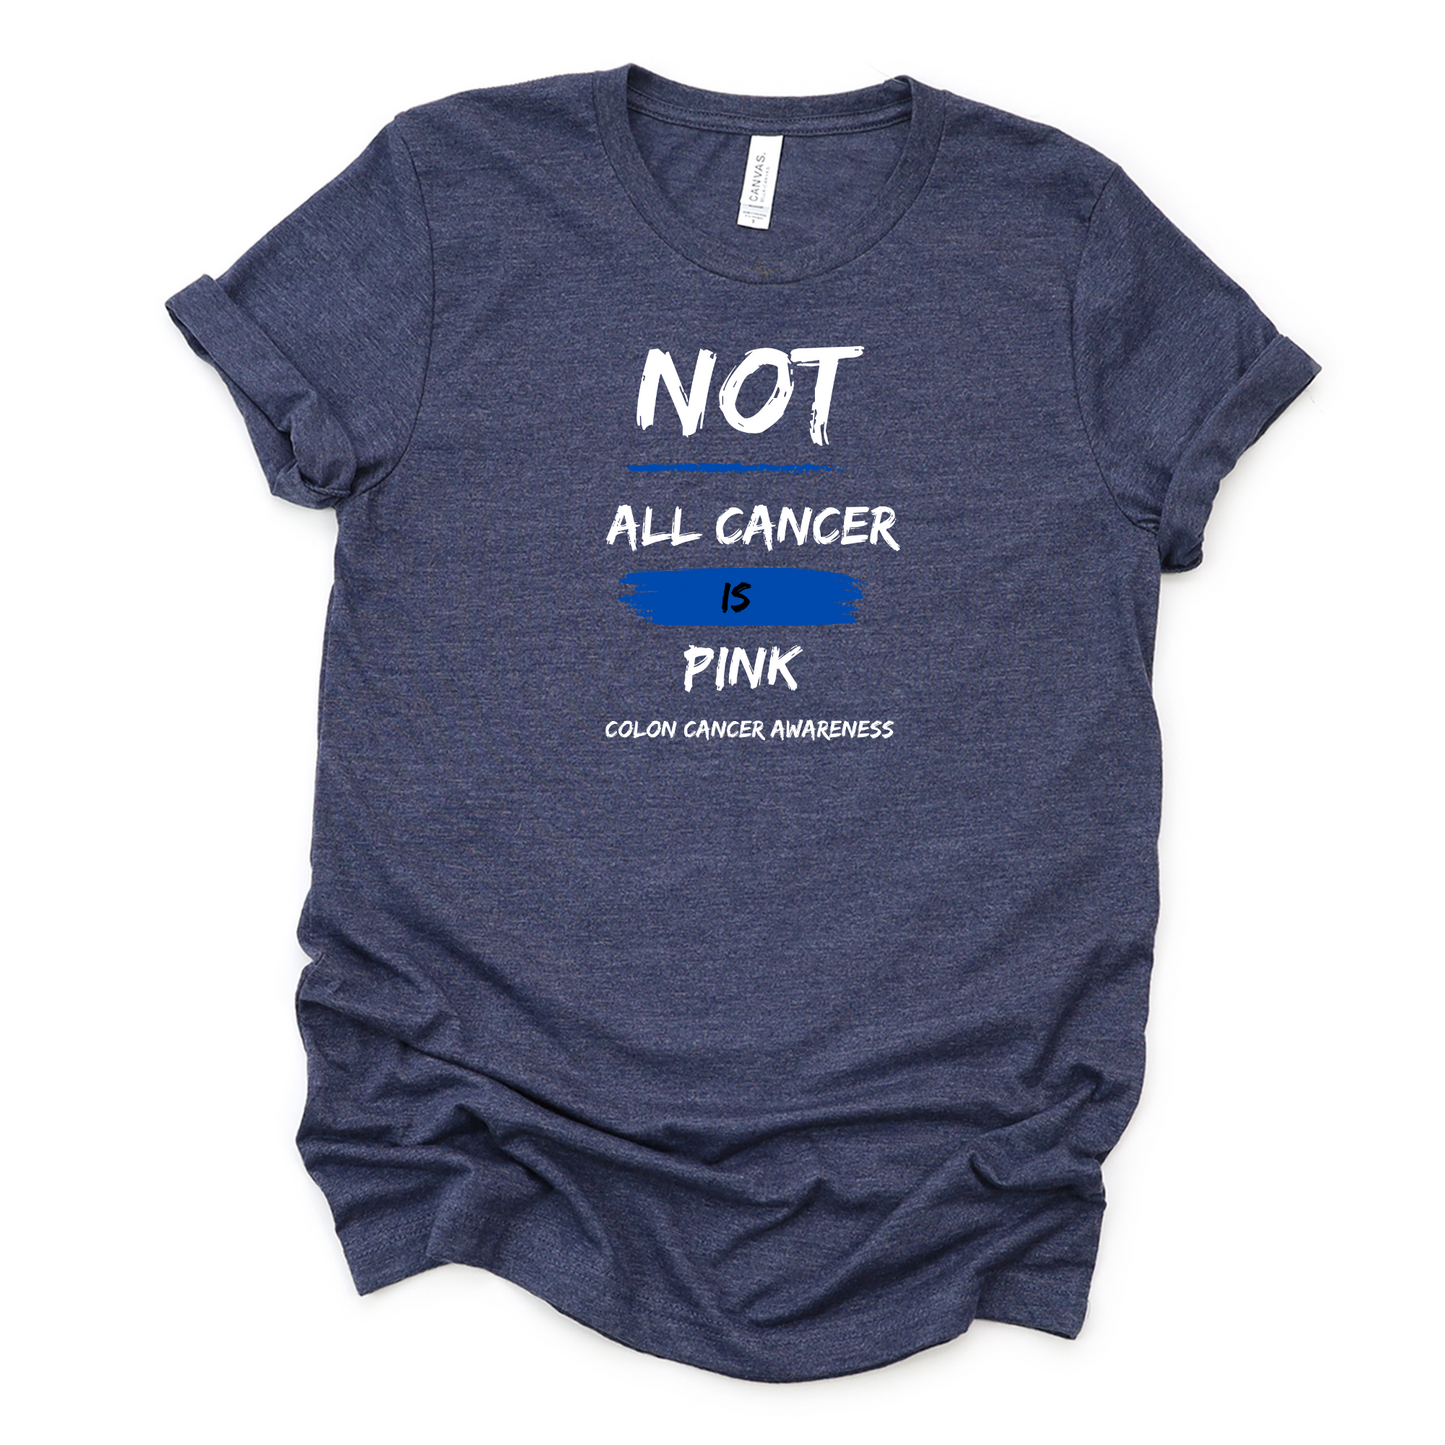 Not All Cancer is Pink Unisex tee